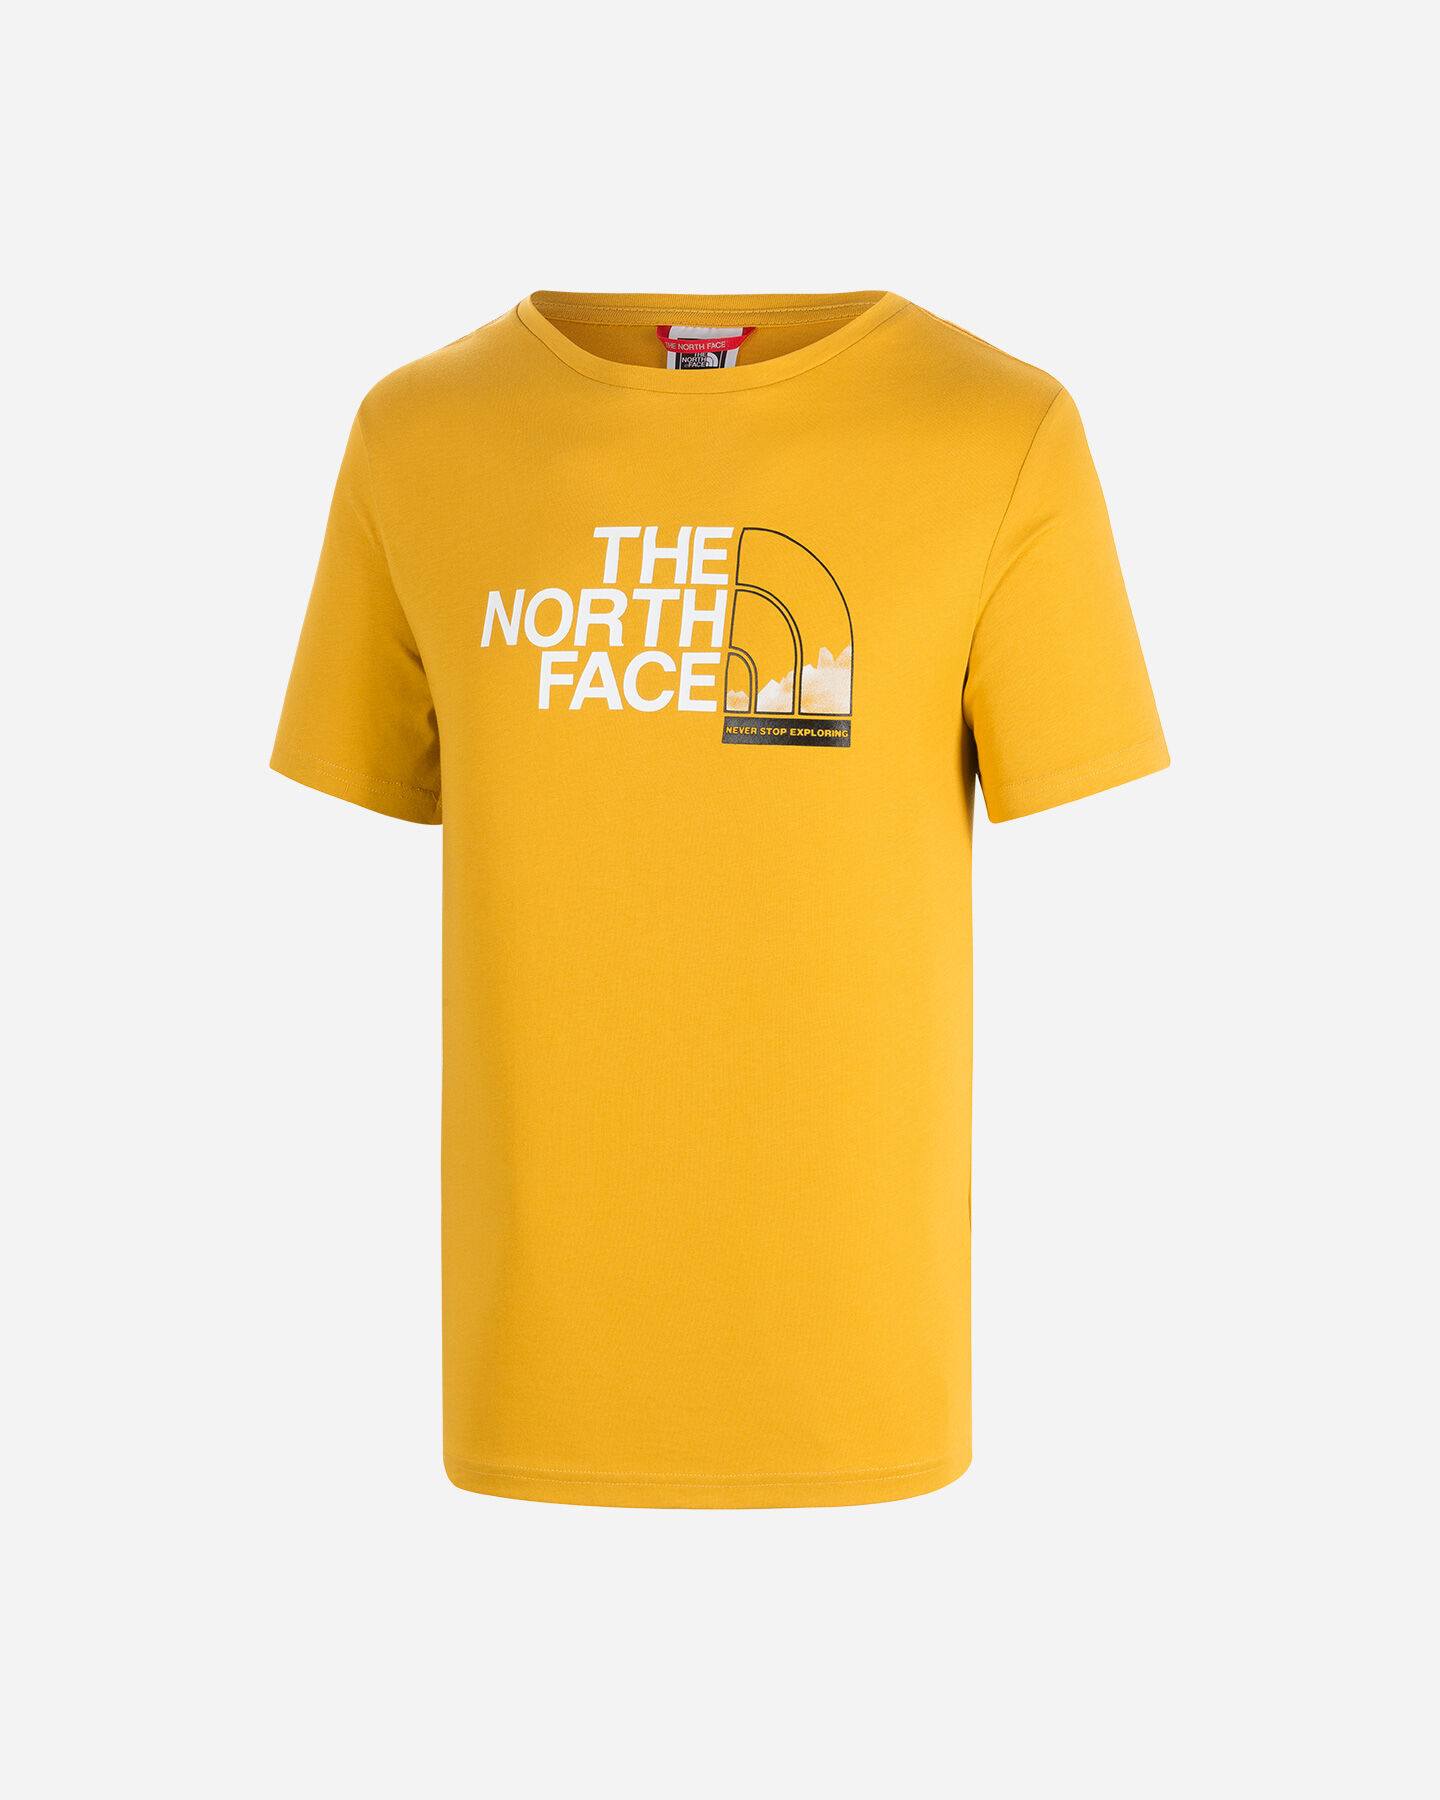  T-Shirt THE NORTH FACE GRAPHIC  BIG LOGO M S5347992|H9D|XS scatto 0